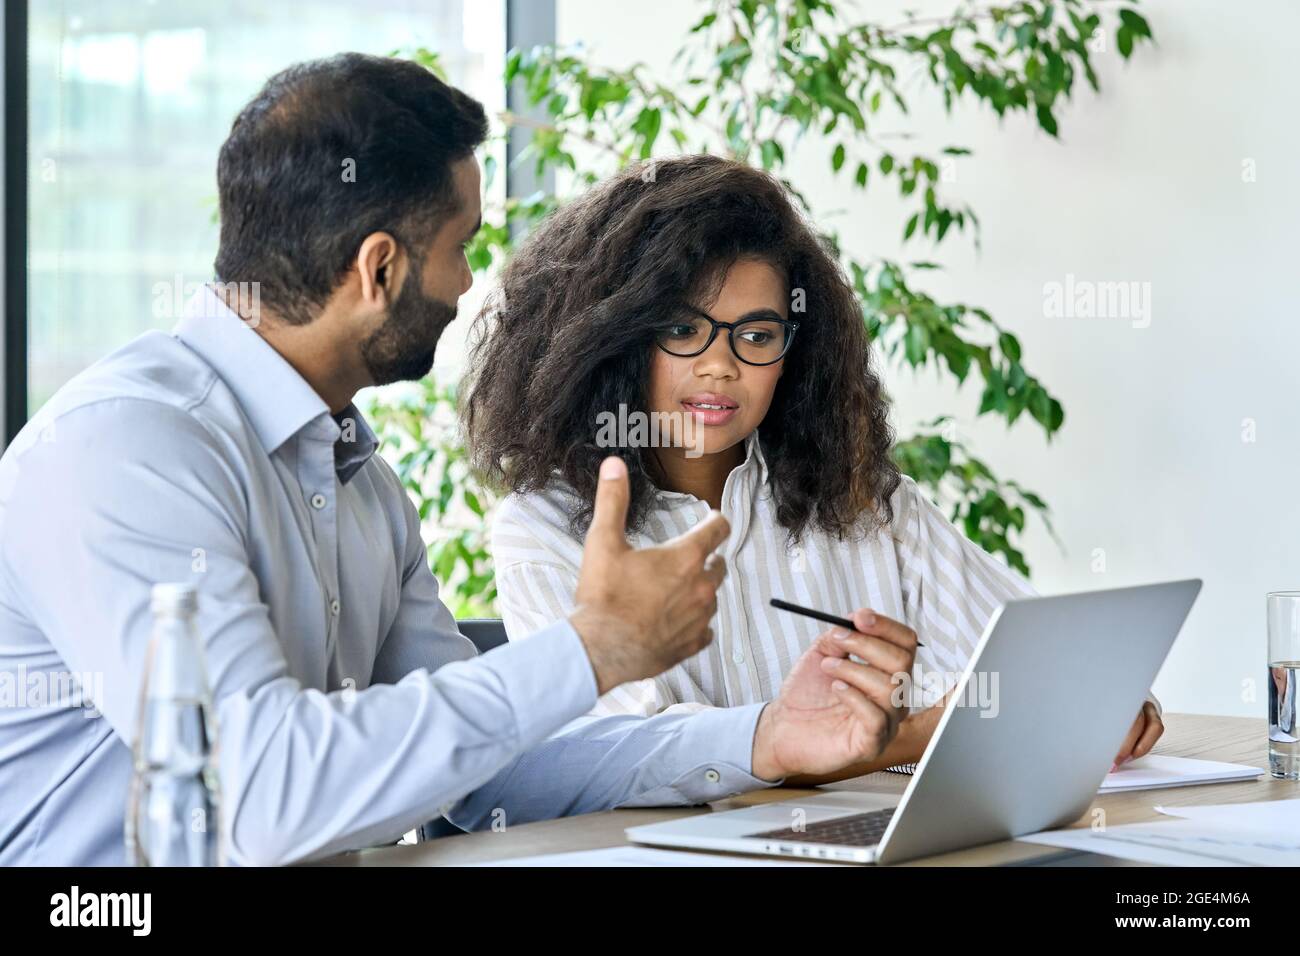 Indian ceo businessman banker talking to female client using laptop at meeting. Stock Photo